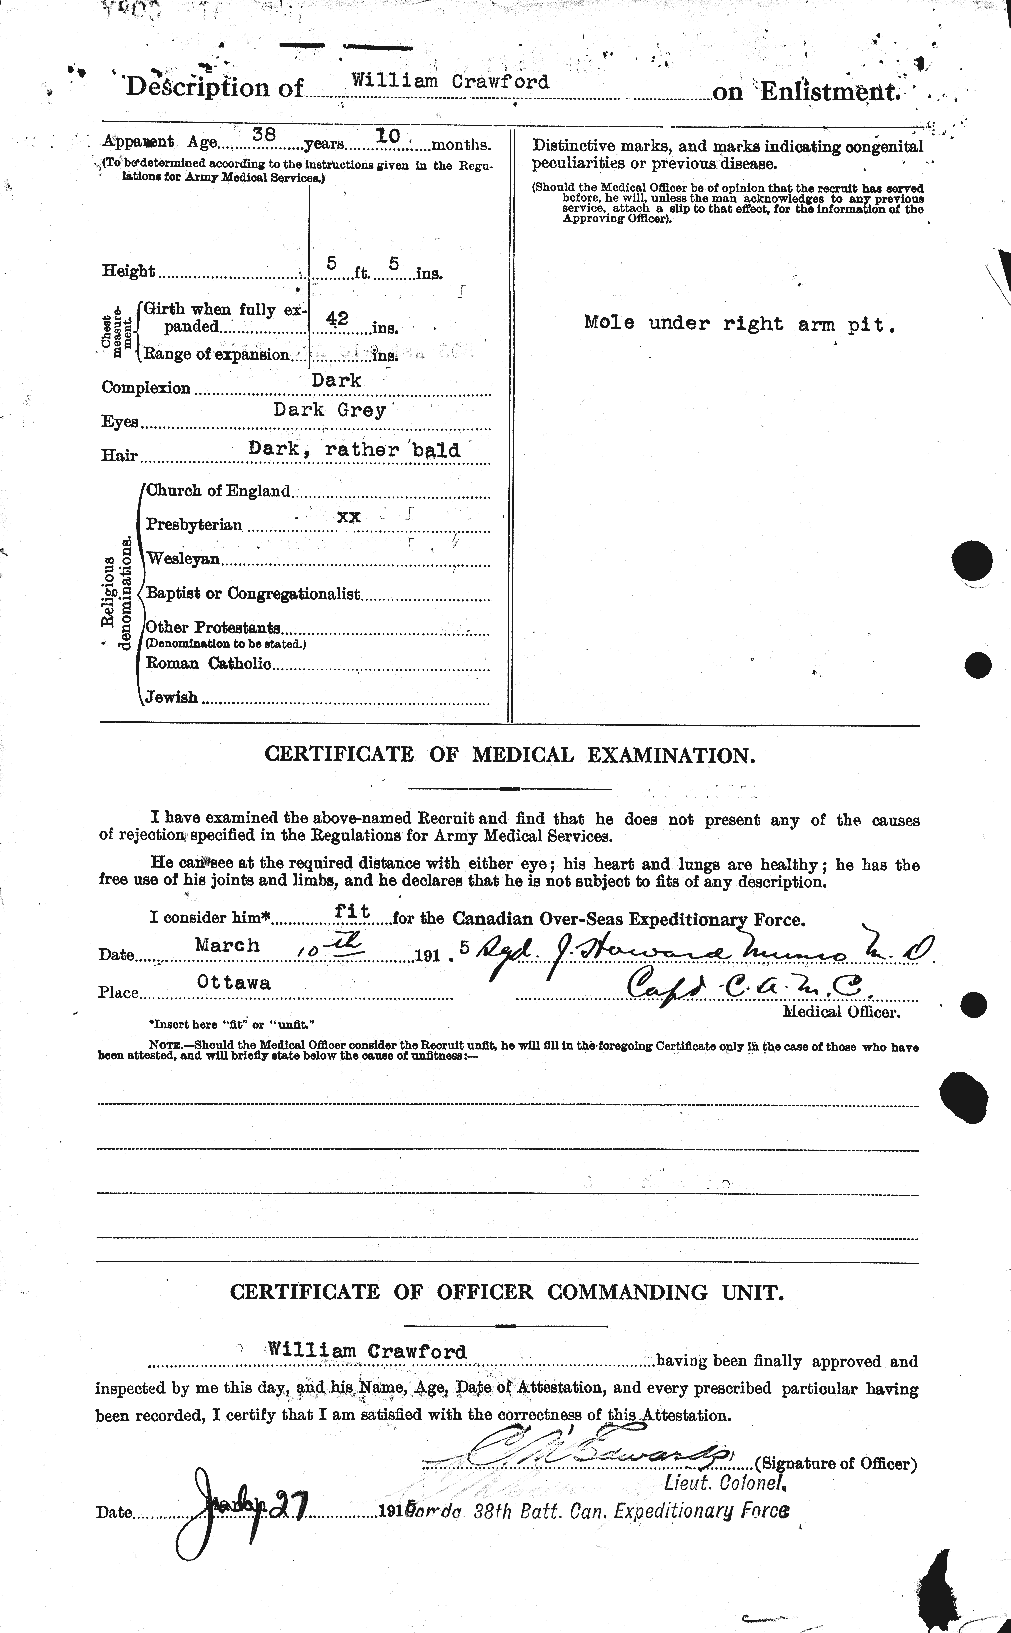 Personnel Records of the First World War - CEF 061157b